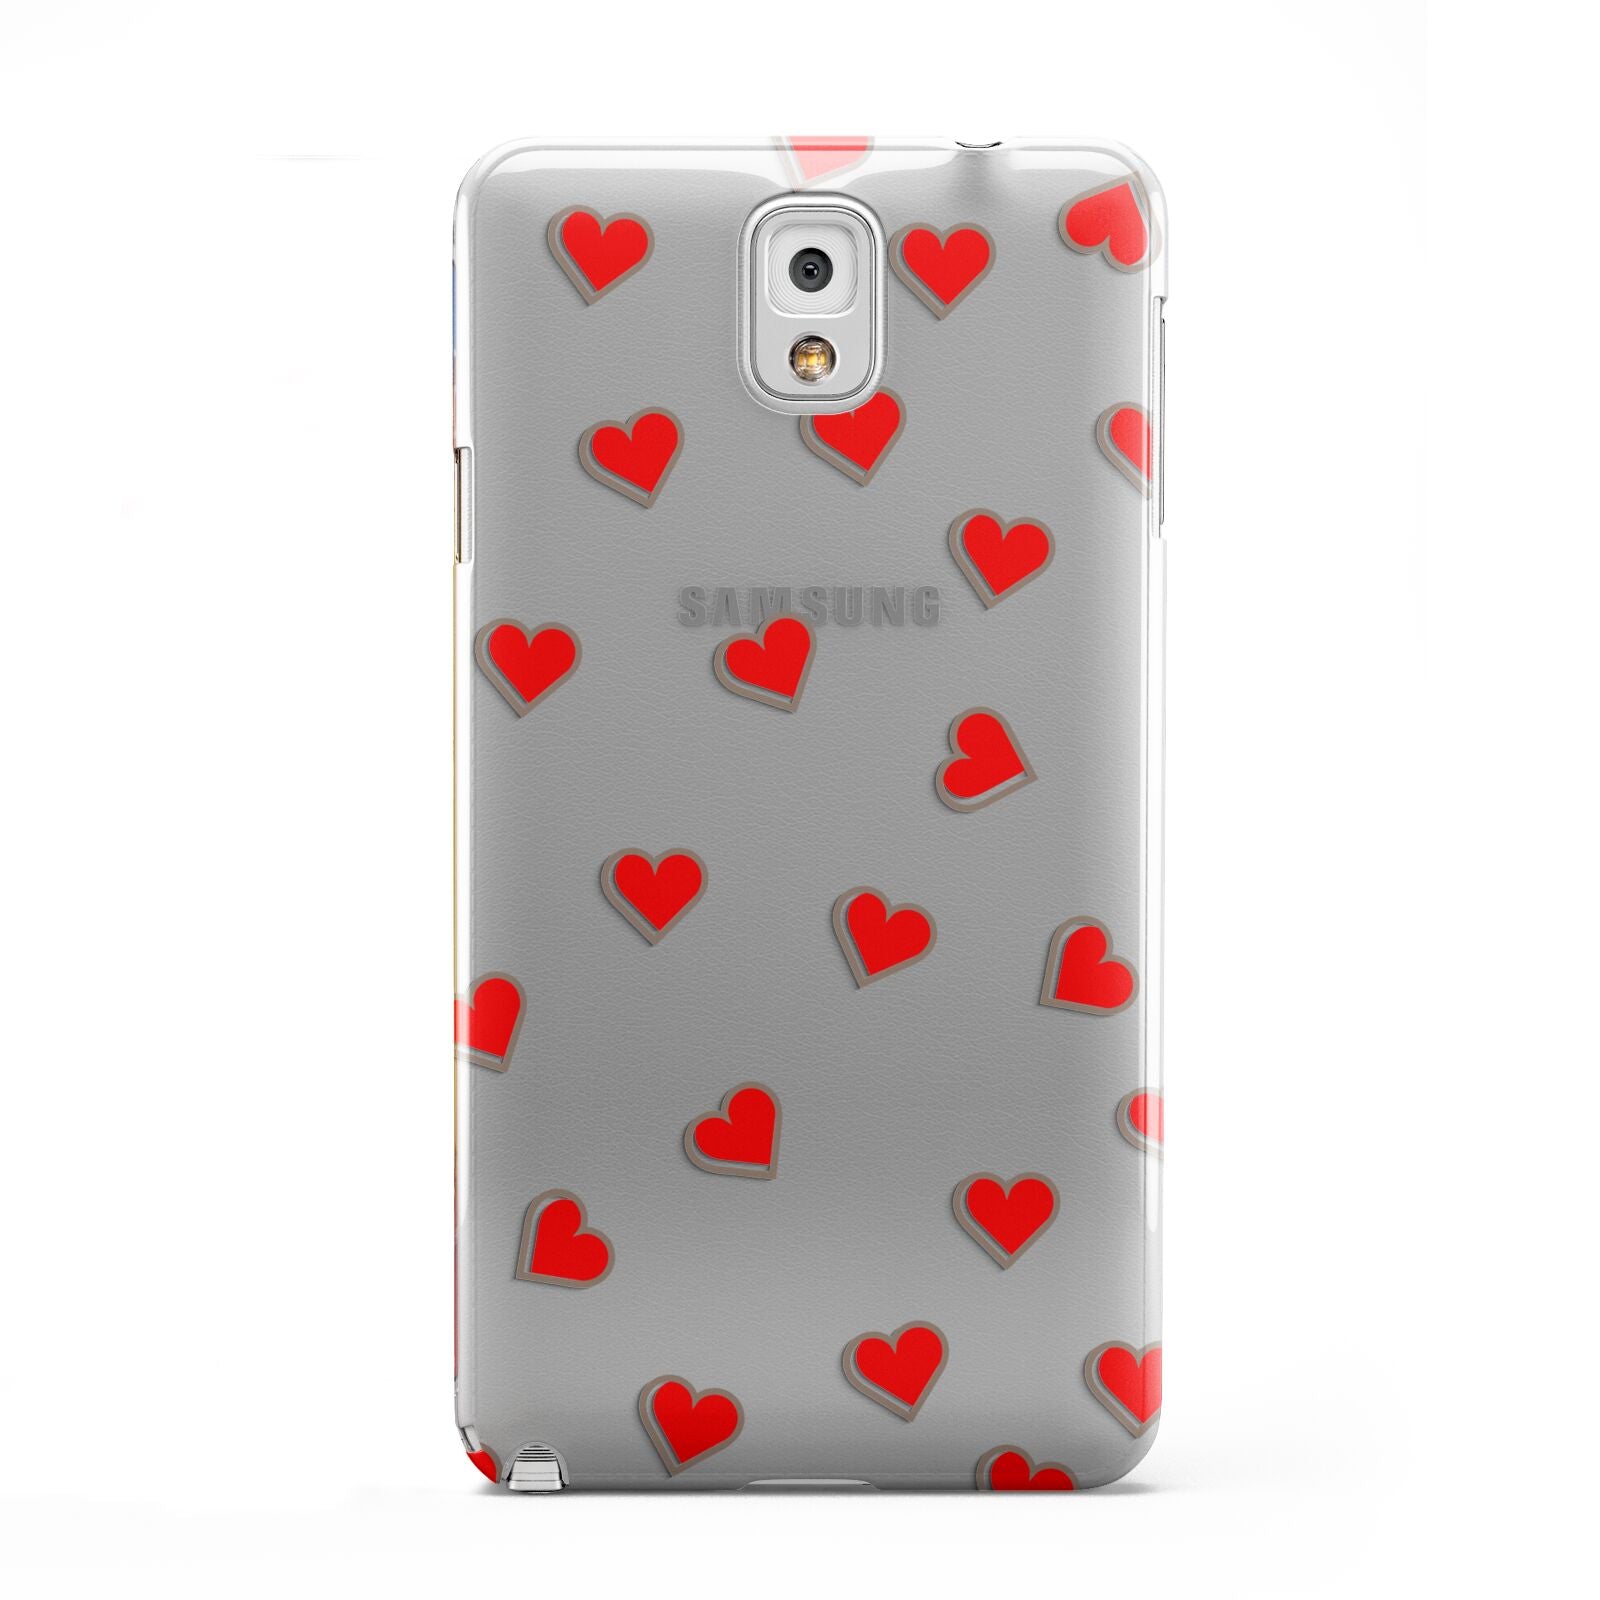 Cute Red Hearts Samsung Galaxy Note 3 Case